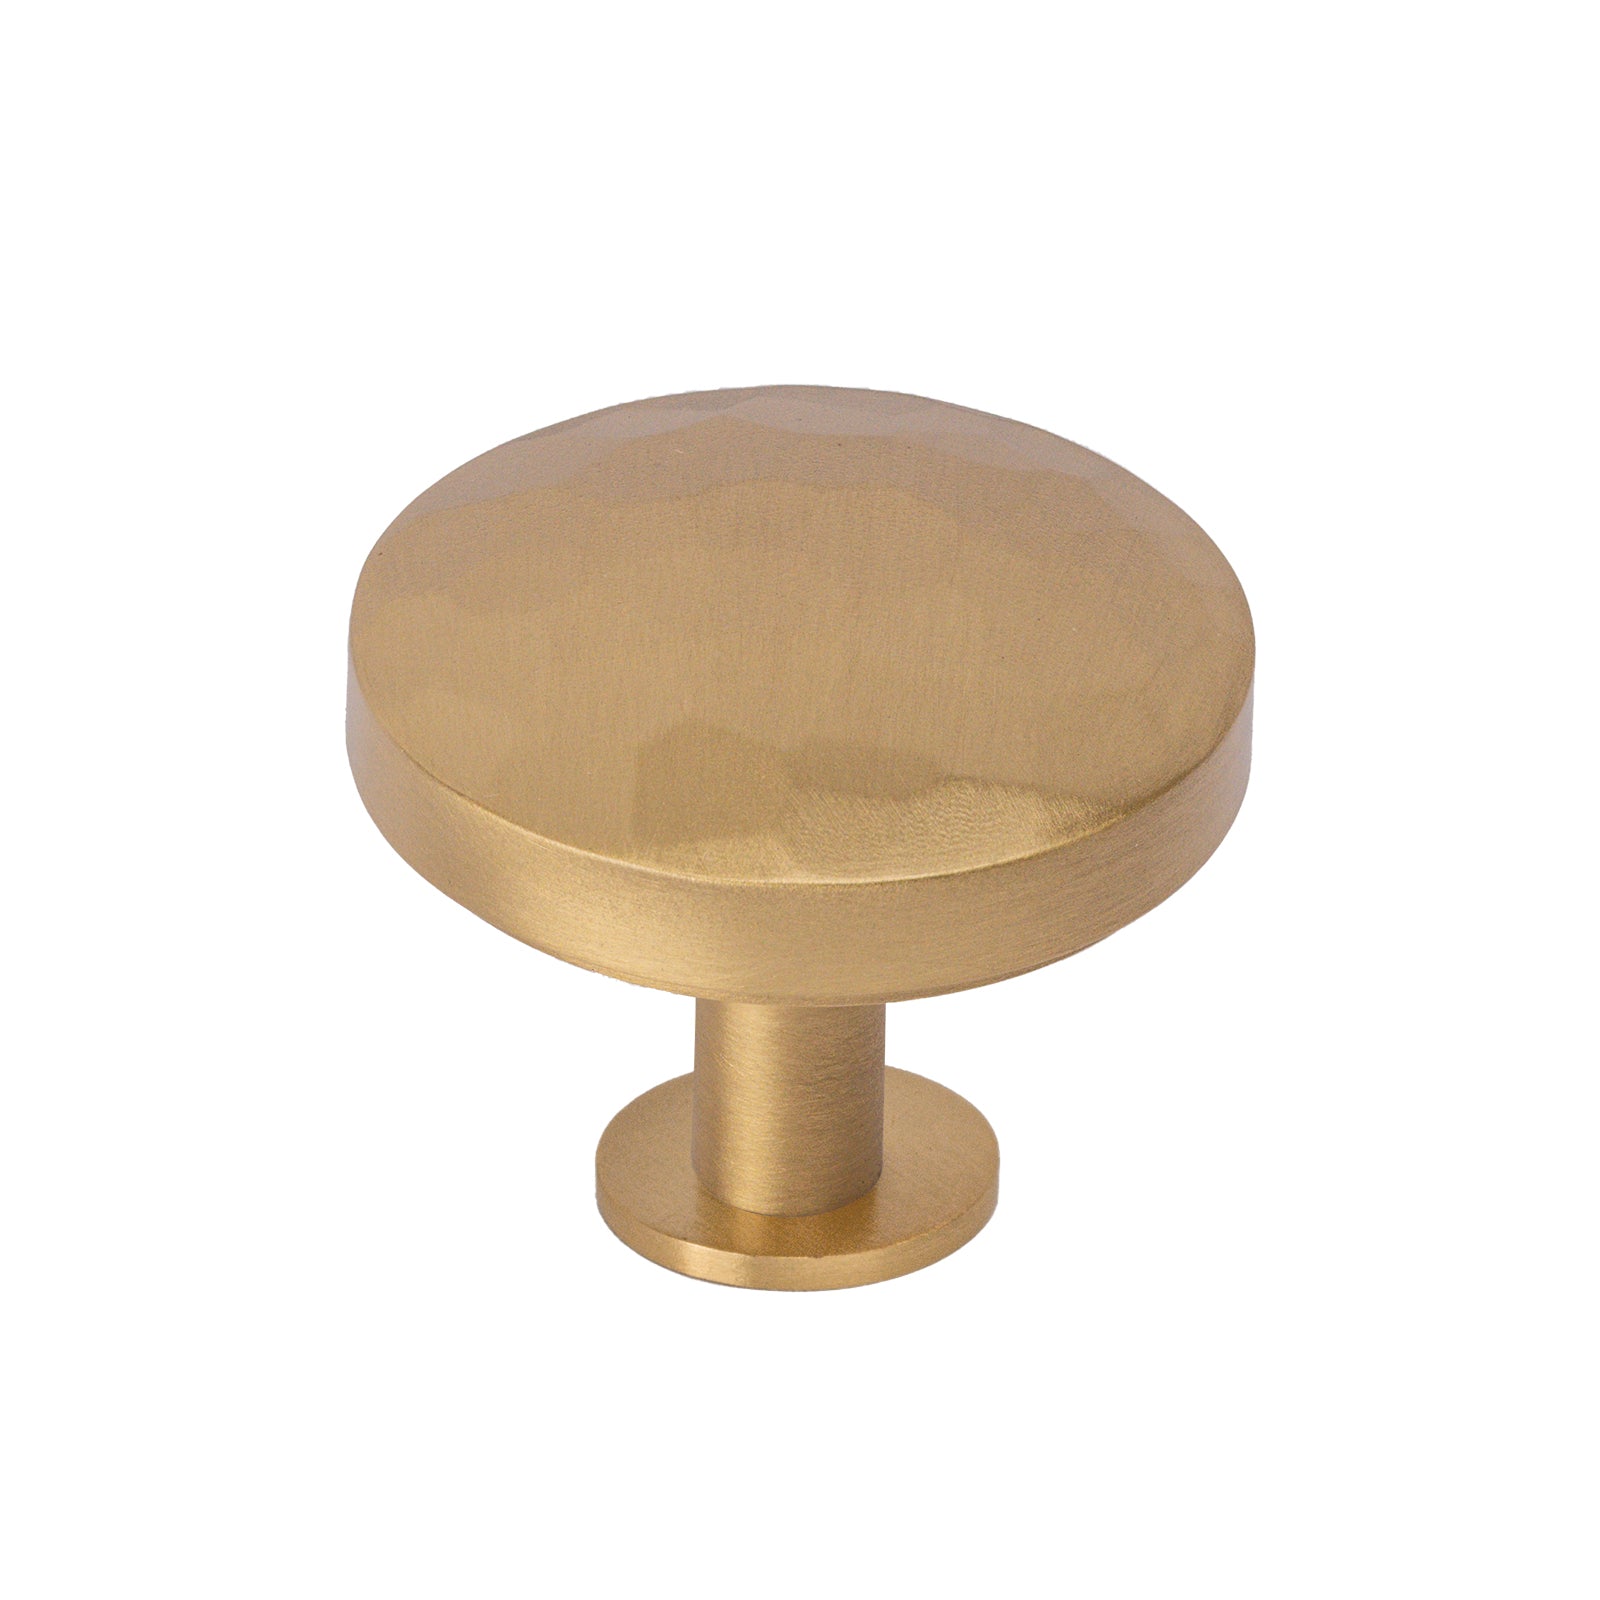 satin brass large hammered knobs with rose plate, kitchen cupboard knobs